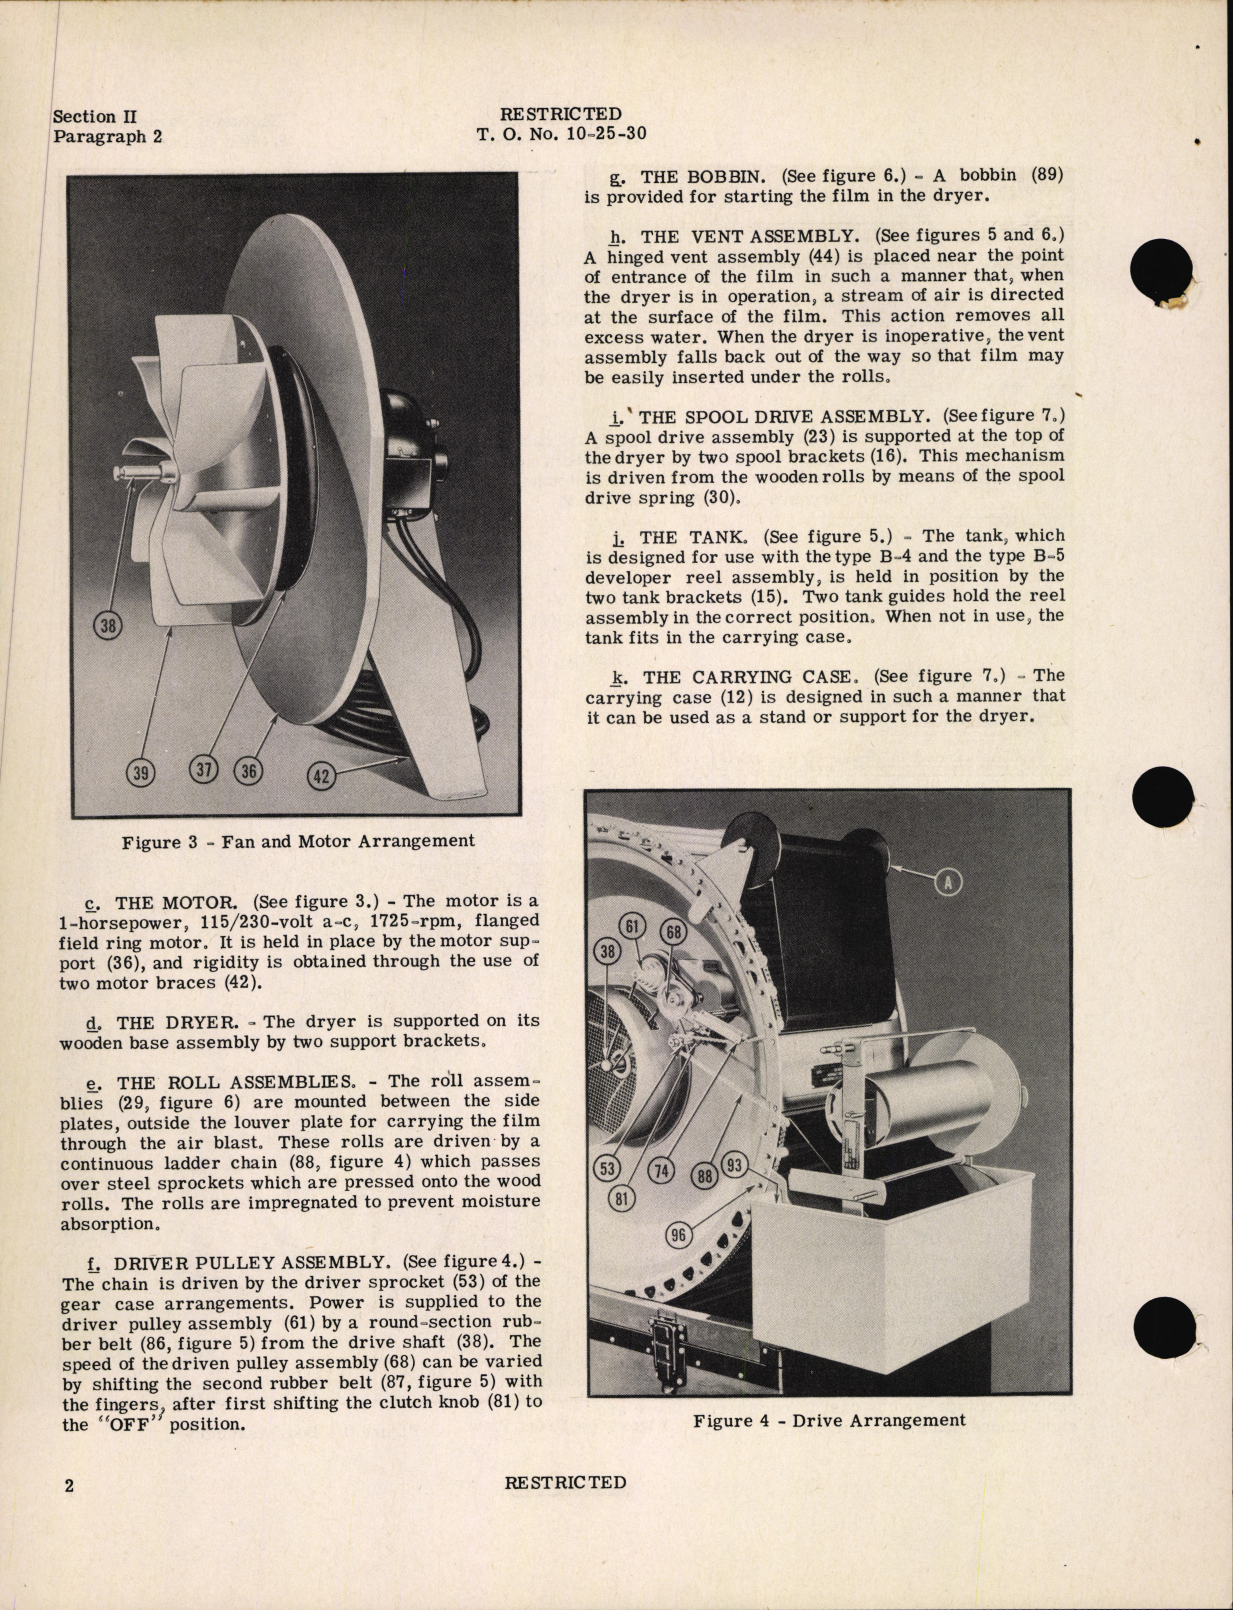 Sample page 6 from AirCorps Library document: Handbook of Instructions with Parts Catalog for Type A-5 Aerial Roll Film Dryer